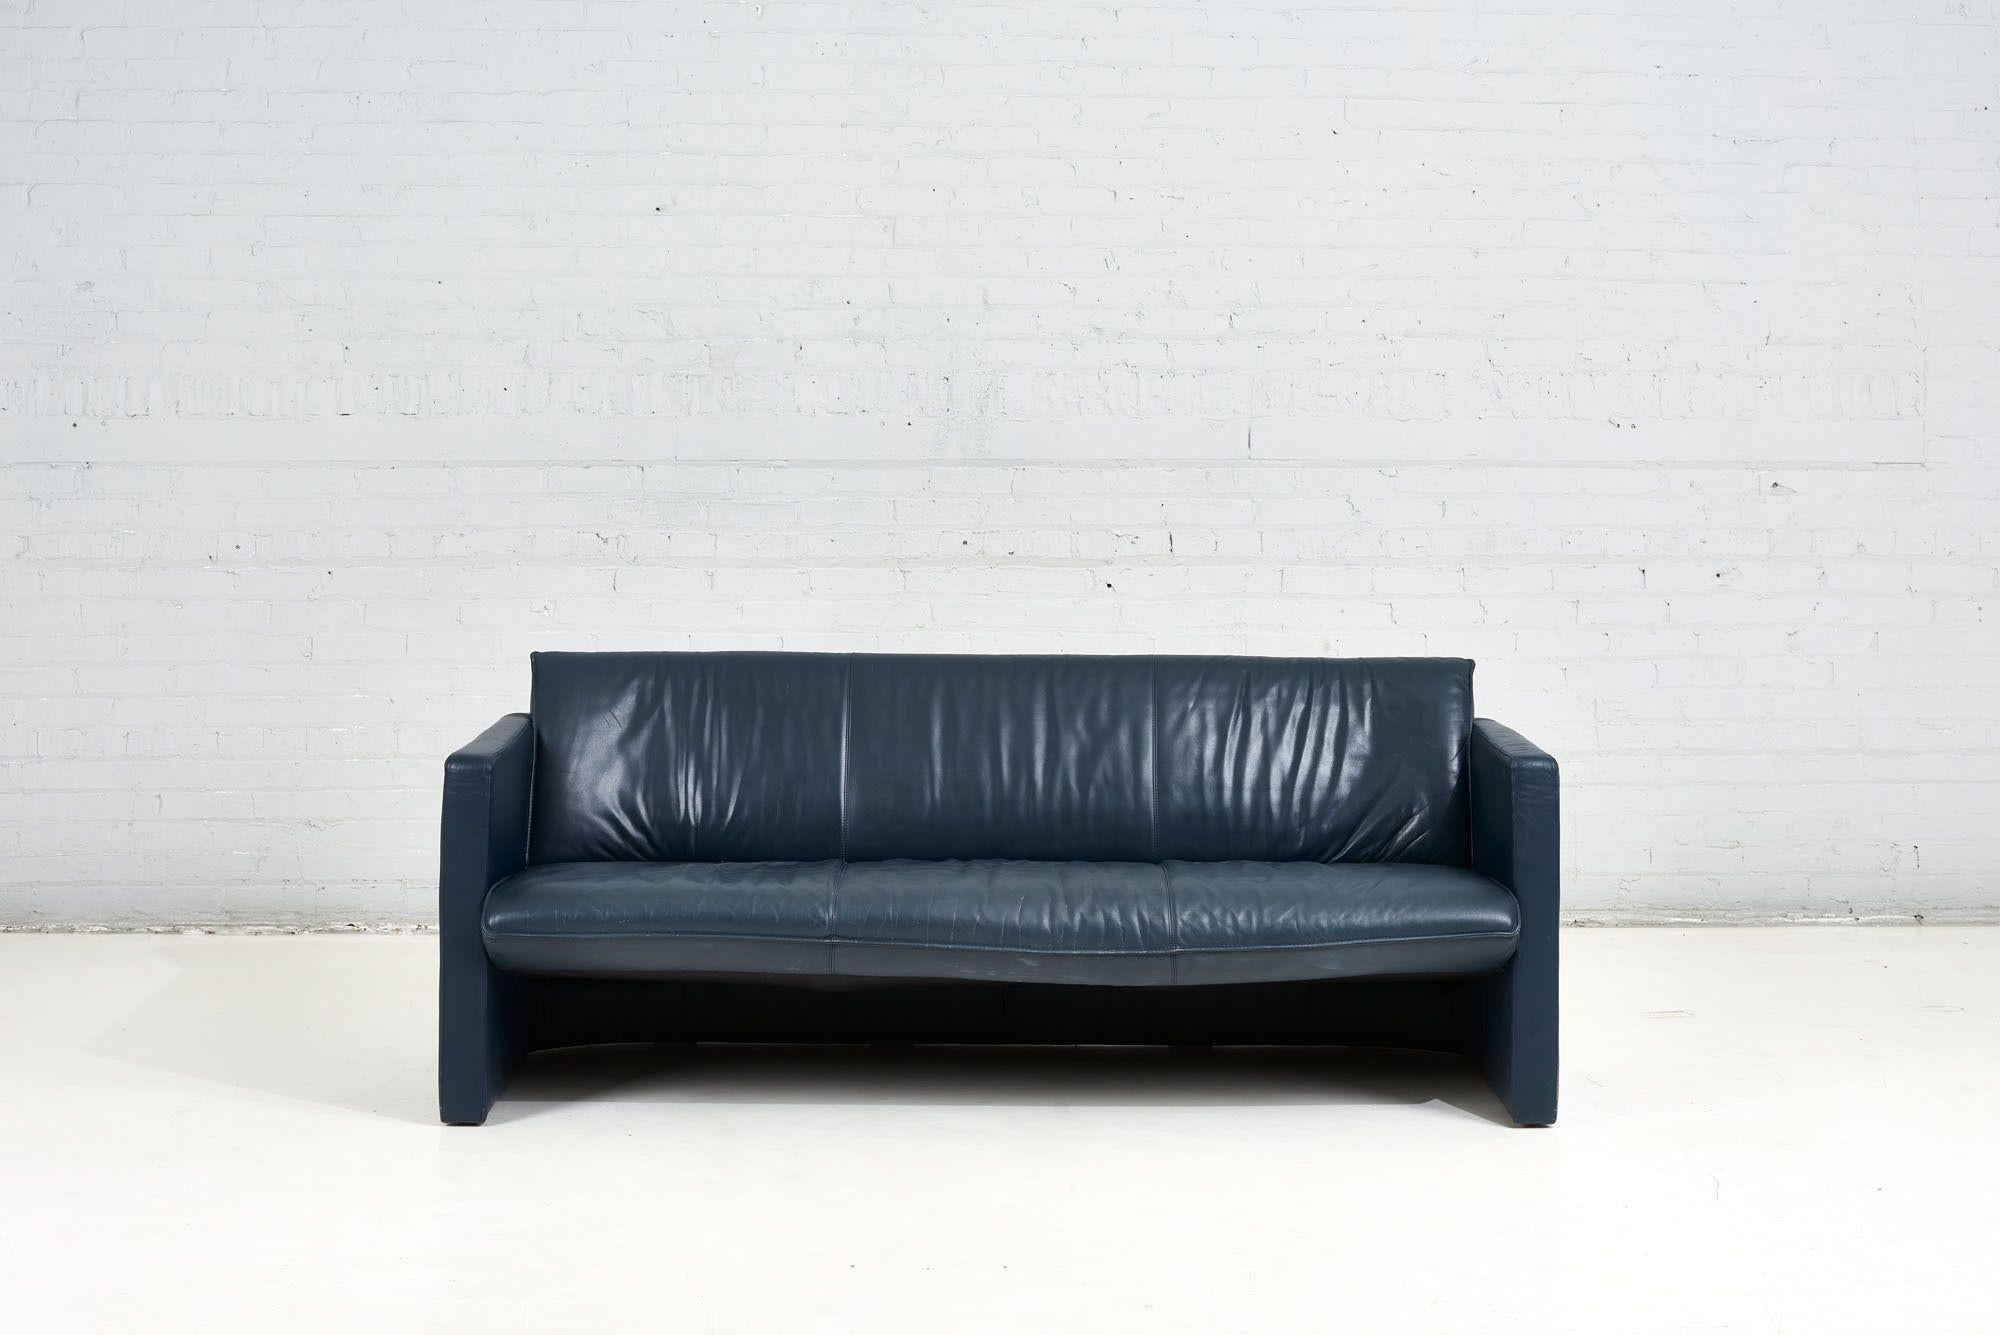 American Post Modern Leather Sofa by Leolux, 1970 For Sale